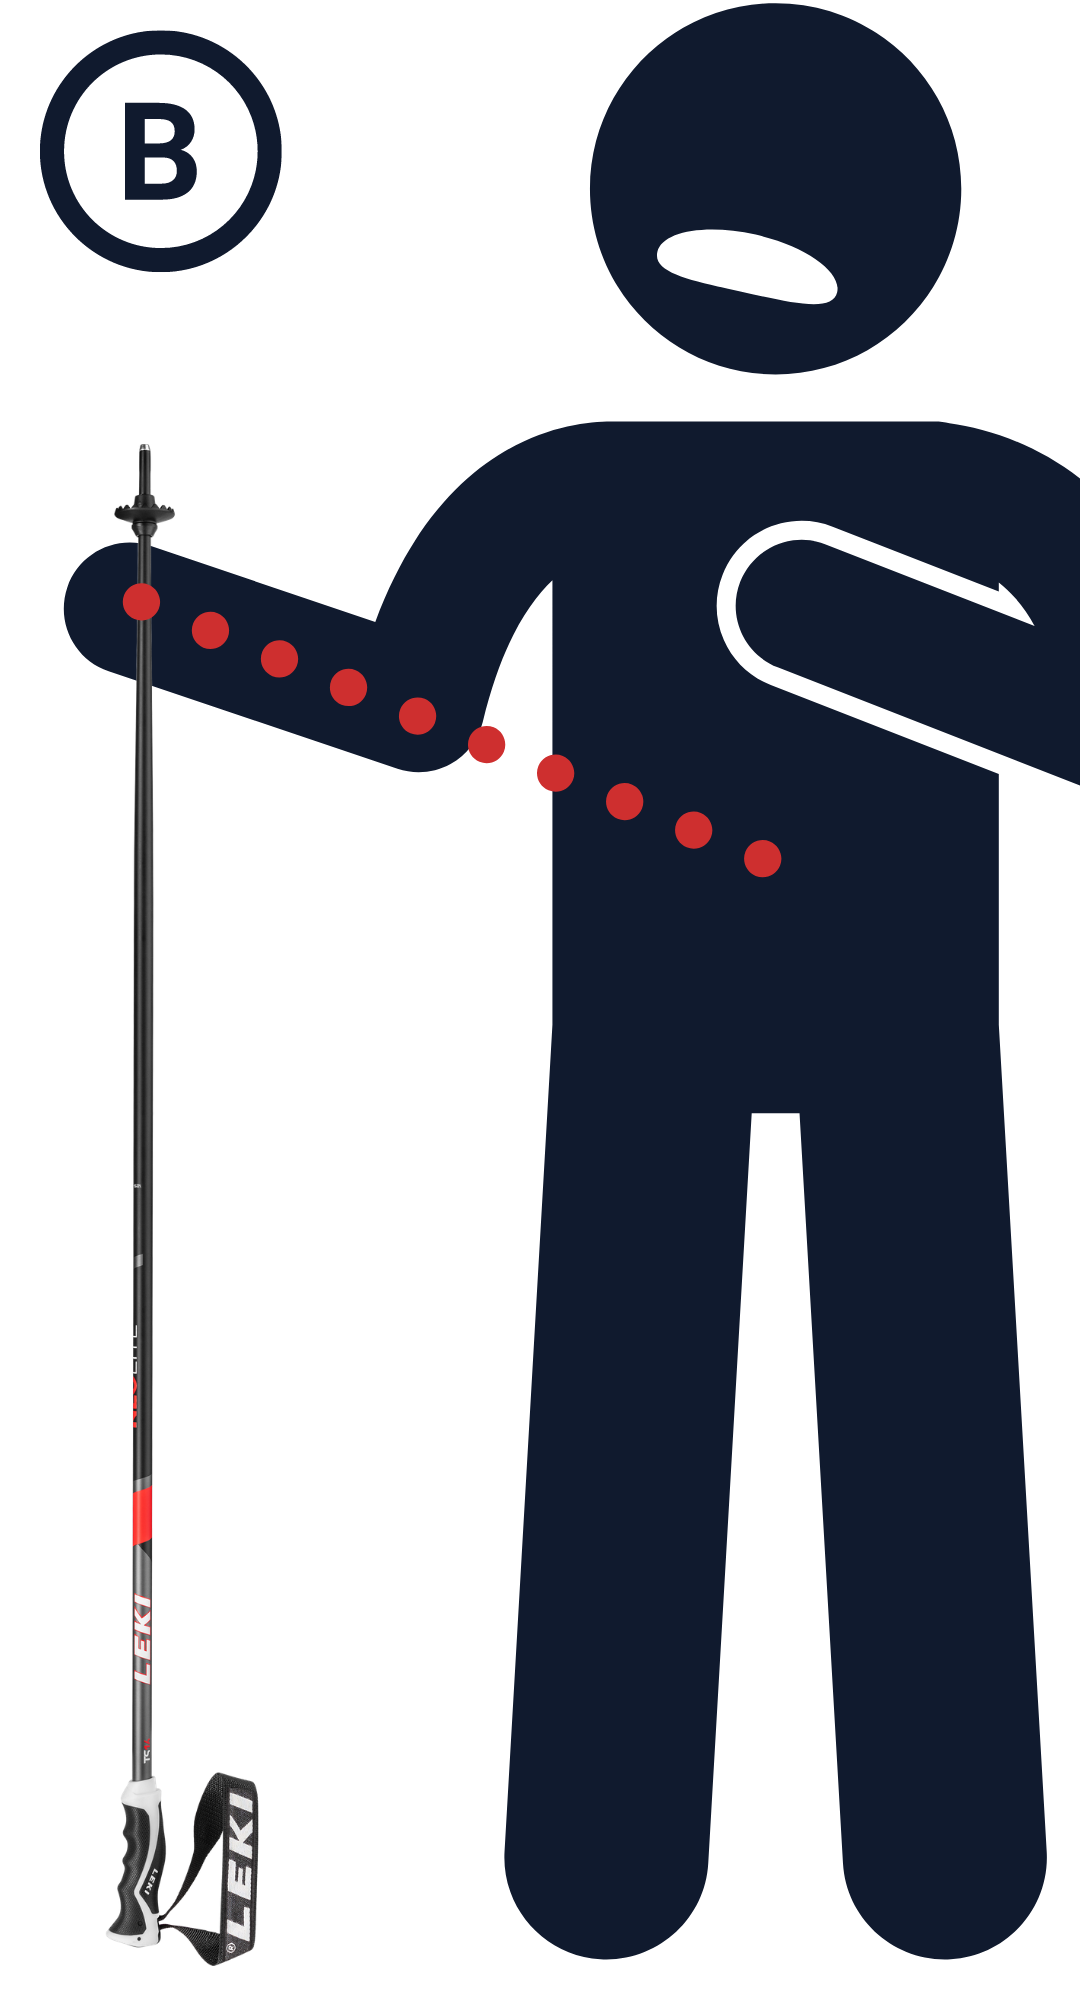 Figure B - A person holding a ski pole that is too long with their elbow bent at under 90 degrees